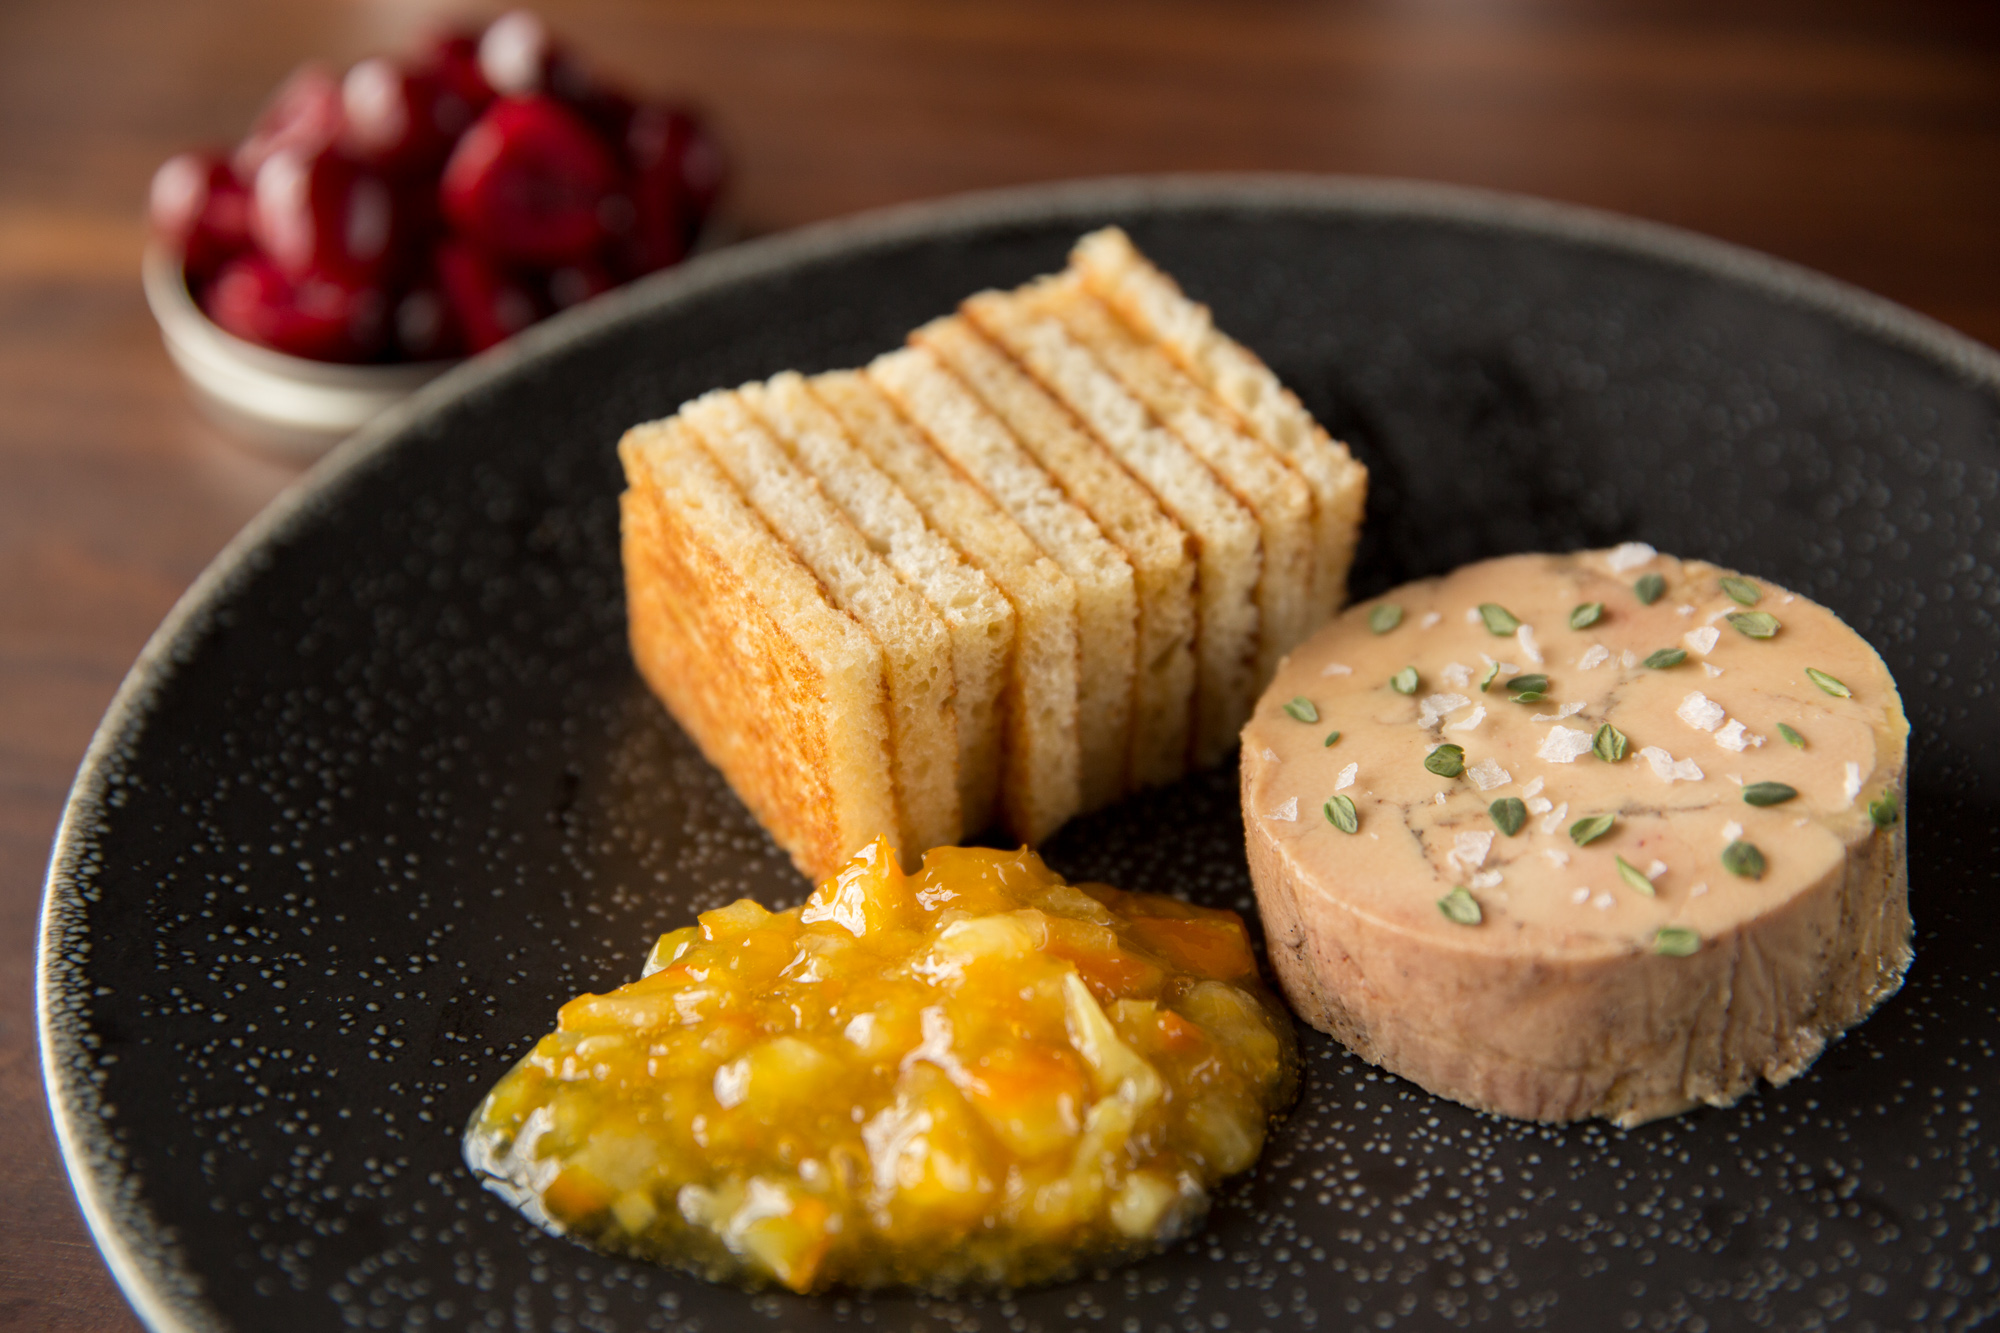 Foie Gras Torchon A Flavor Packed French Snack Your Friends Will Freak Over Sous Vide Recipe Chefsteps,Baked Chicken Breast Meal